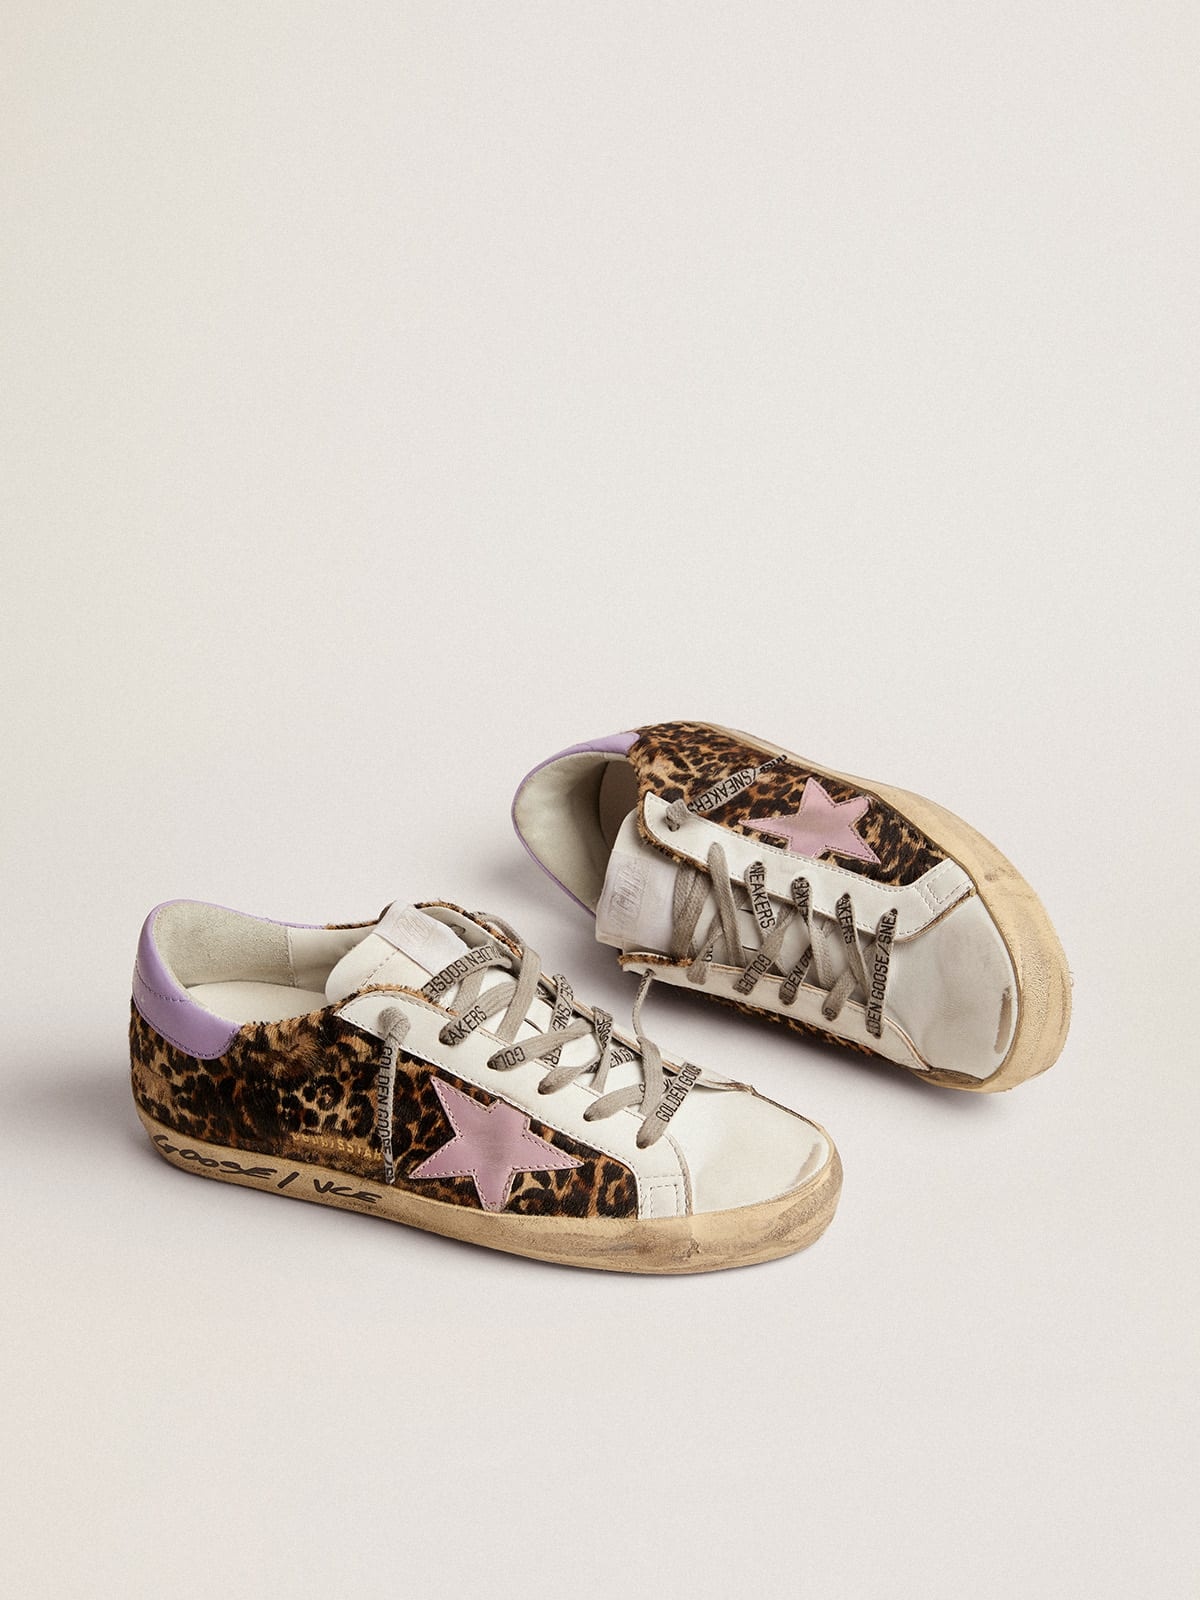 Super-Star LTD sneakers in leopard-print pony skin with salmon-colored laminated leather star and pu - 2